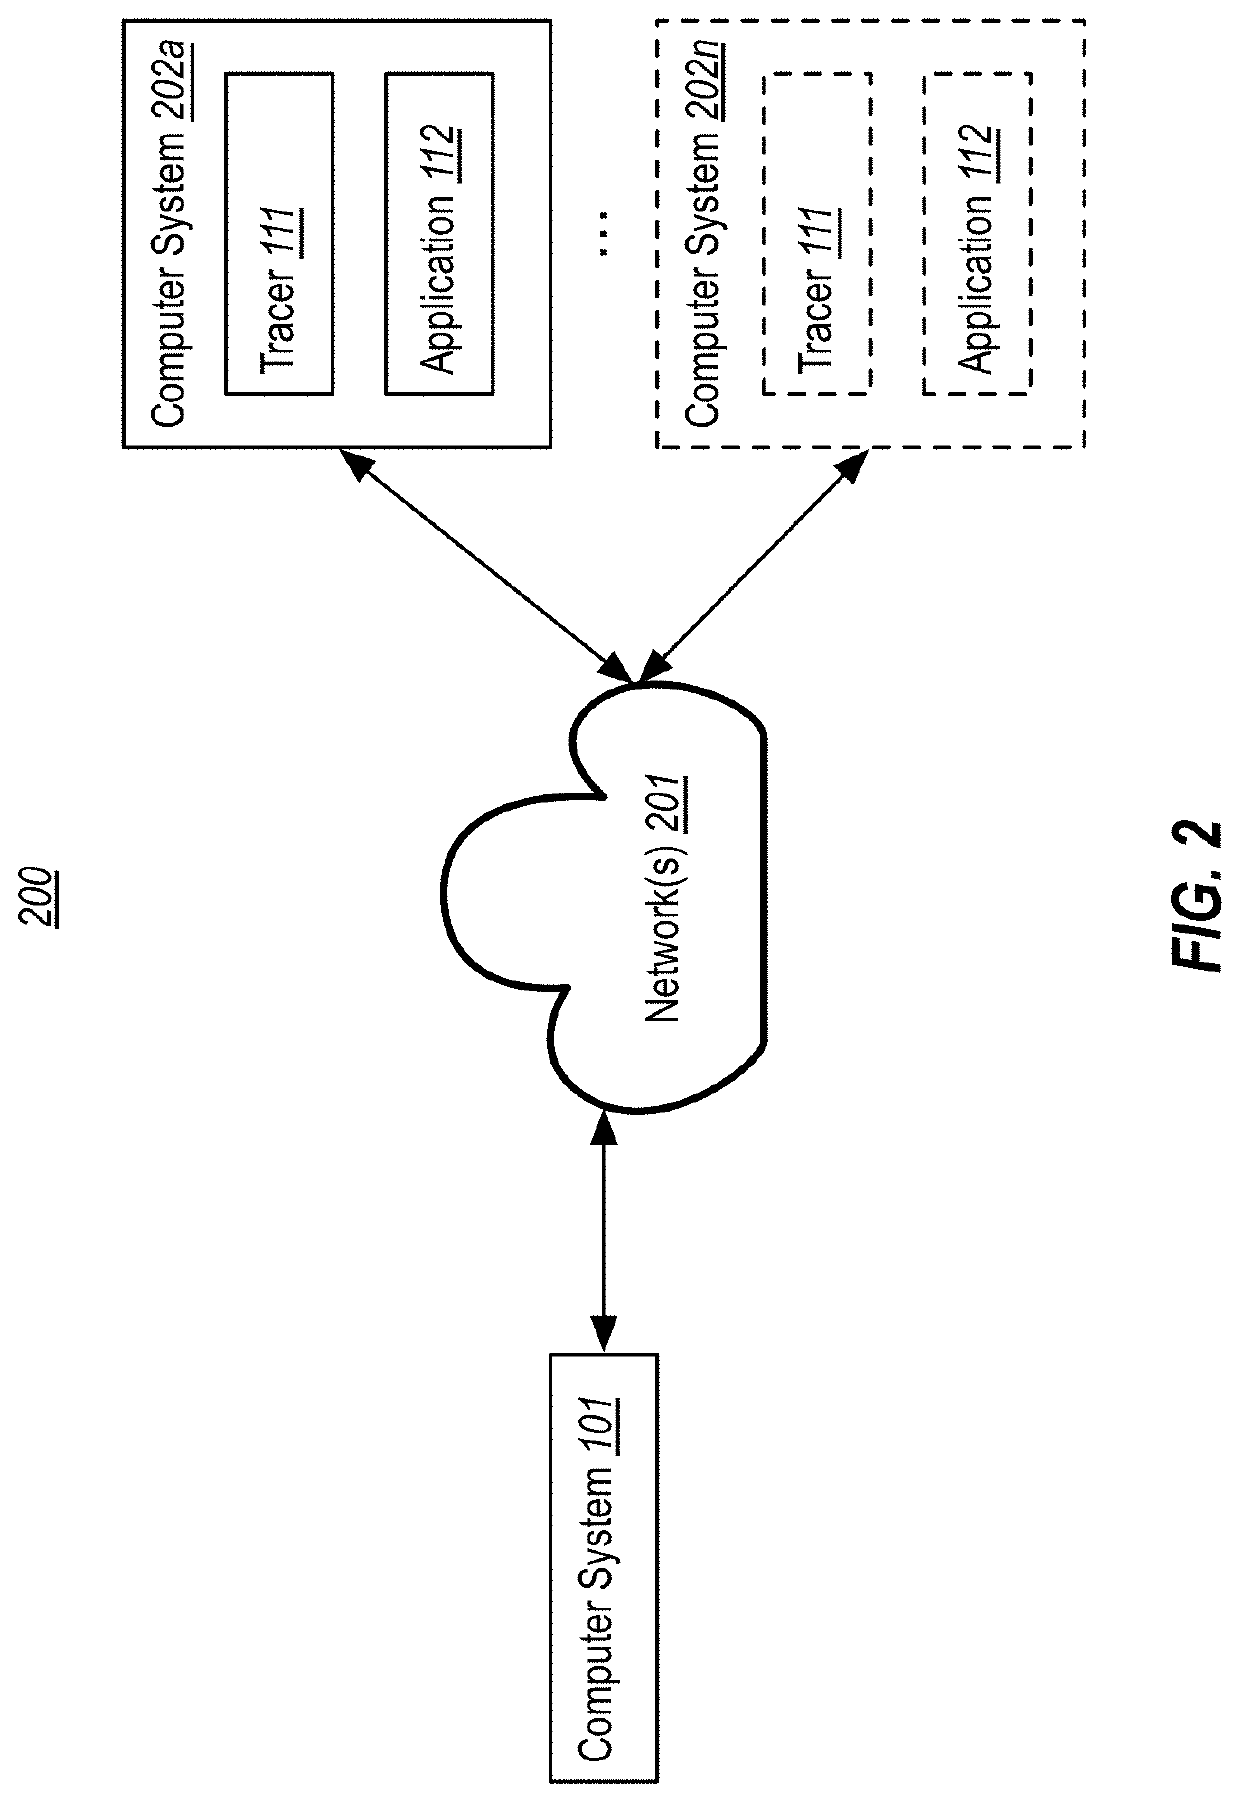 Instruction set architecture transformations when emulating non-traced code with a recorded execution of traced code